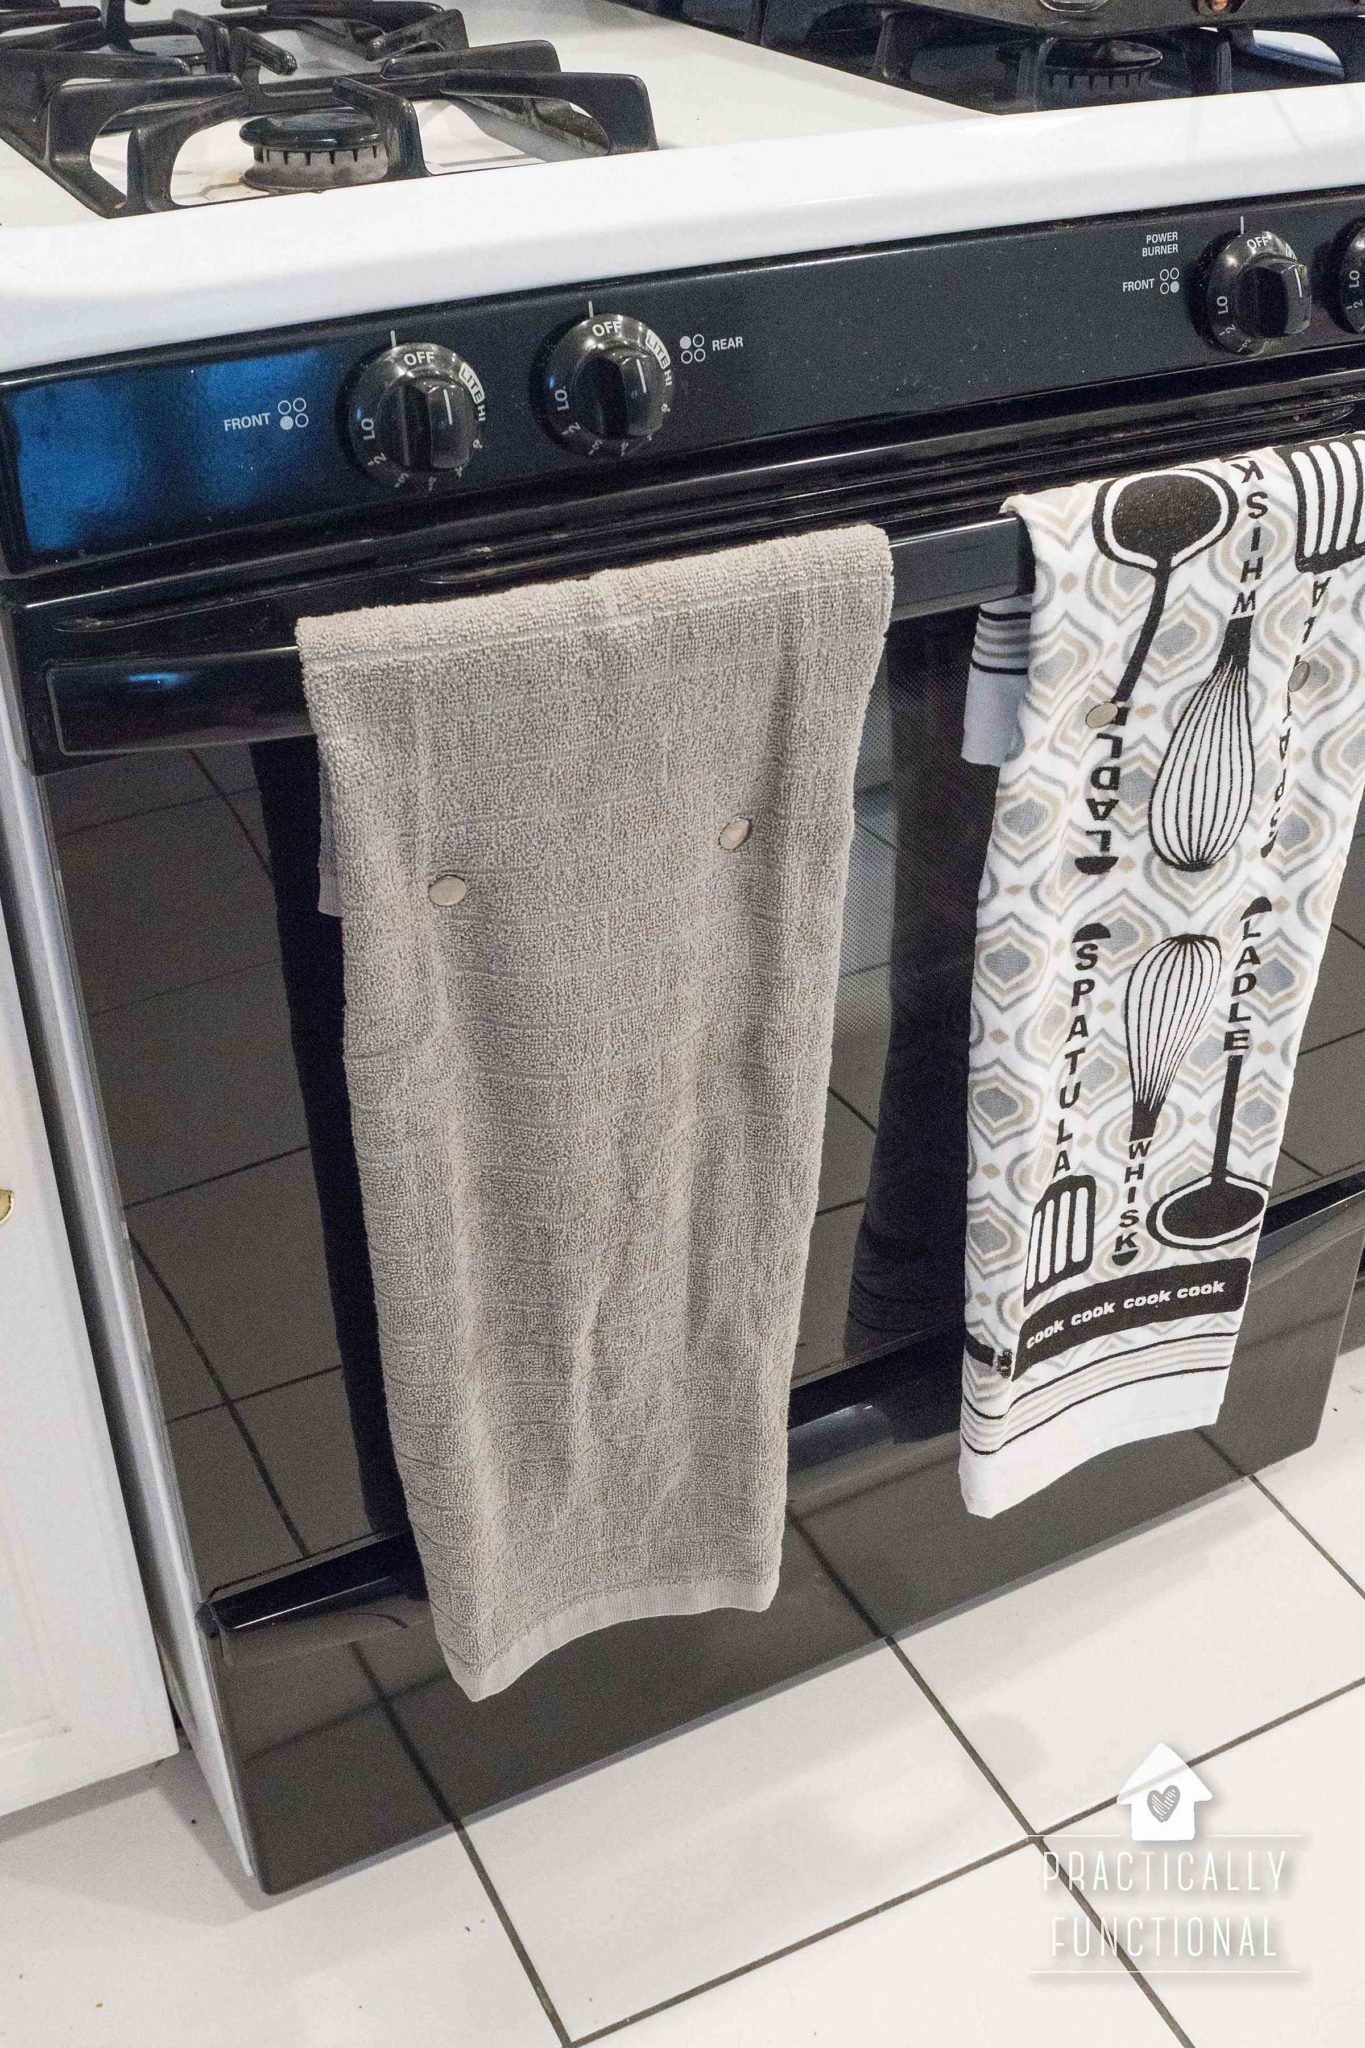 How To Make Hanging Kitchen Towels